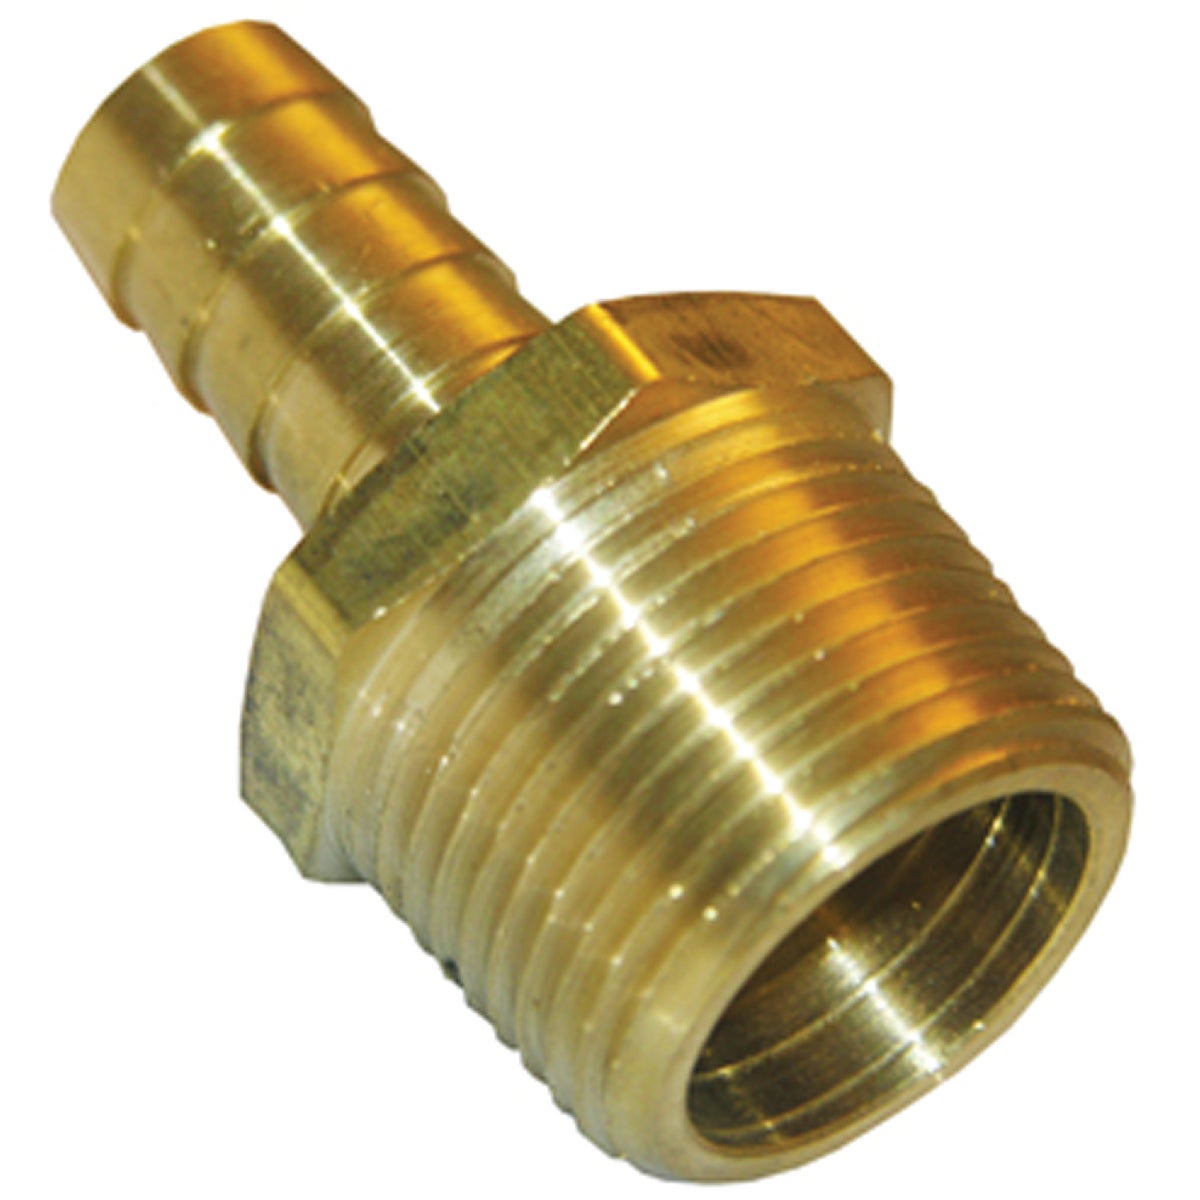 Lasco 3/4 In. MPT x 1/2 In. Brass Hose Barb Adapter